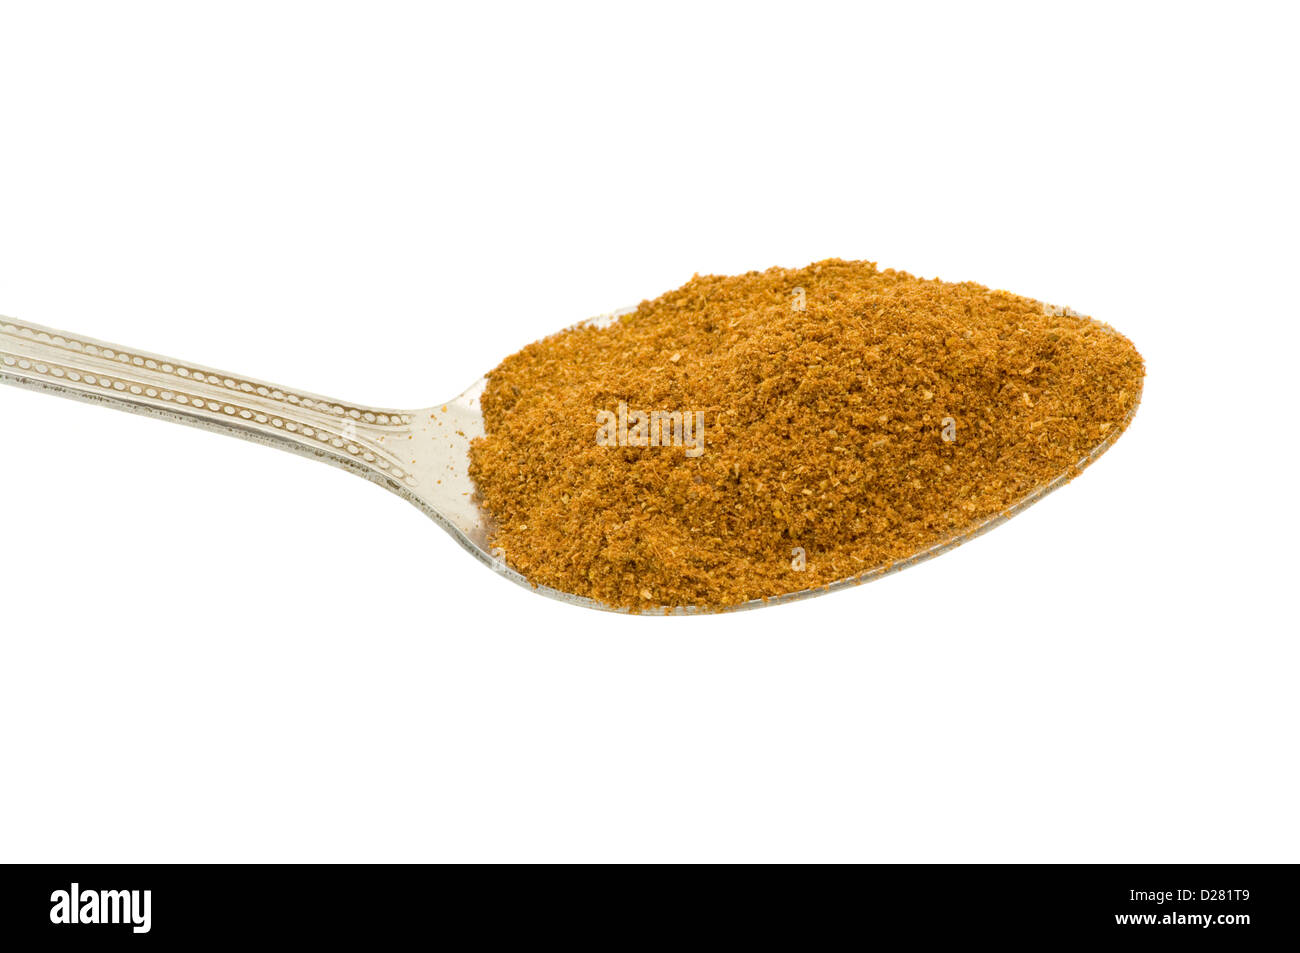 A Teaspoon Of Mixed Ground Spice Against a White Background Stock Photo